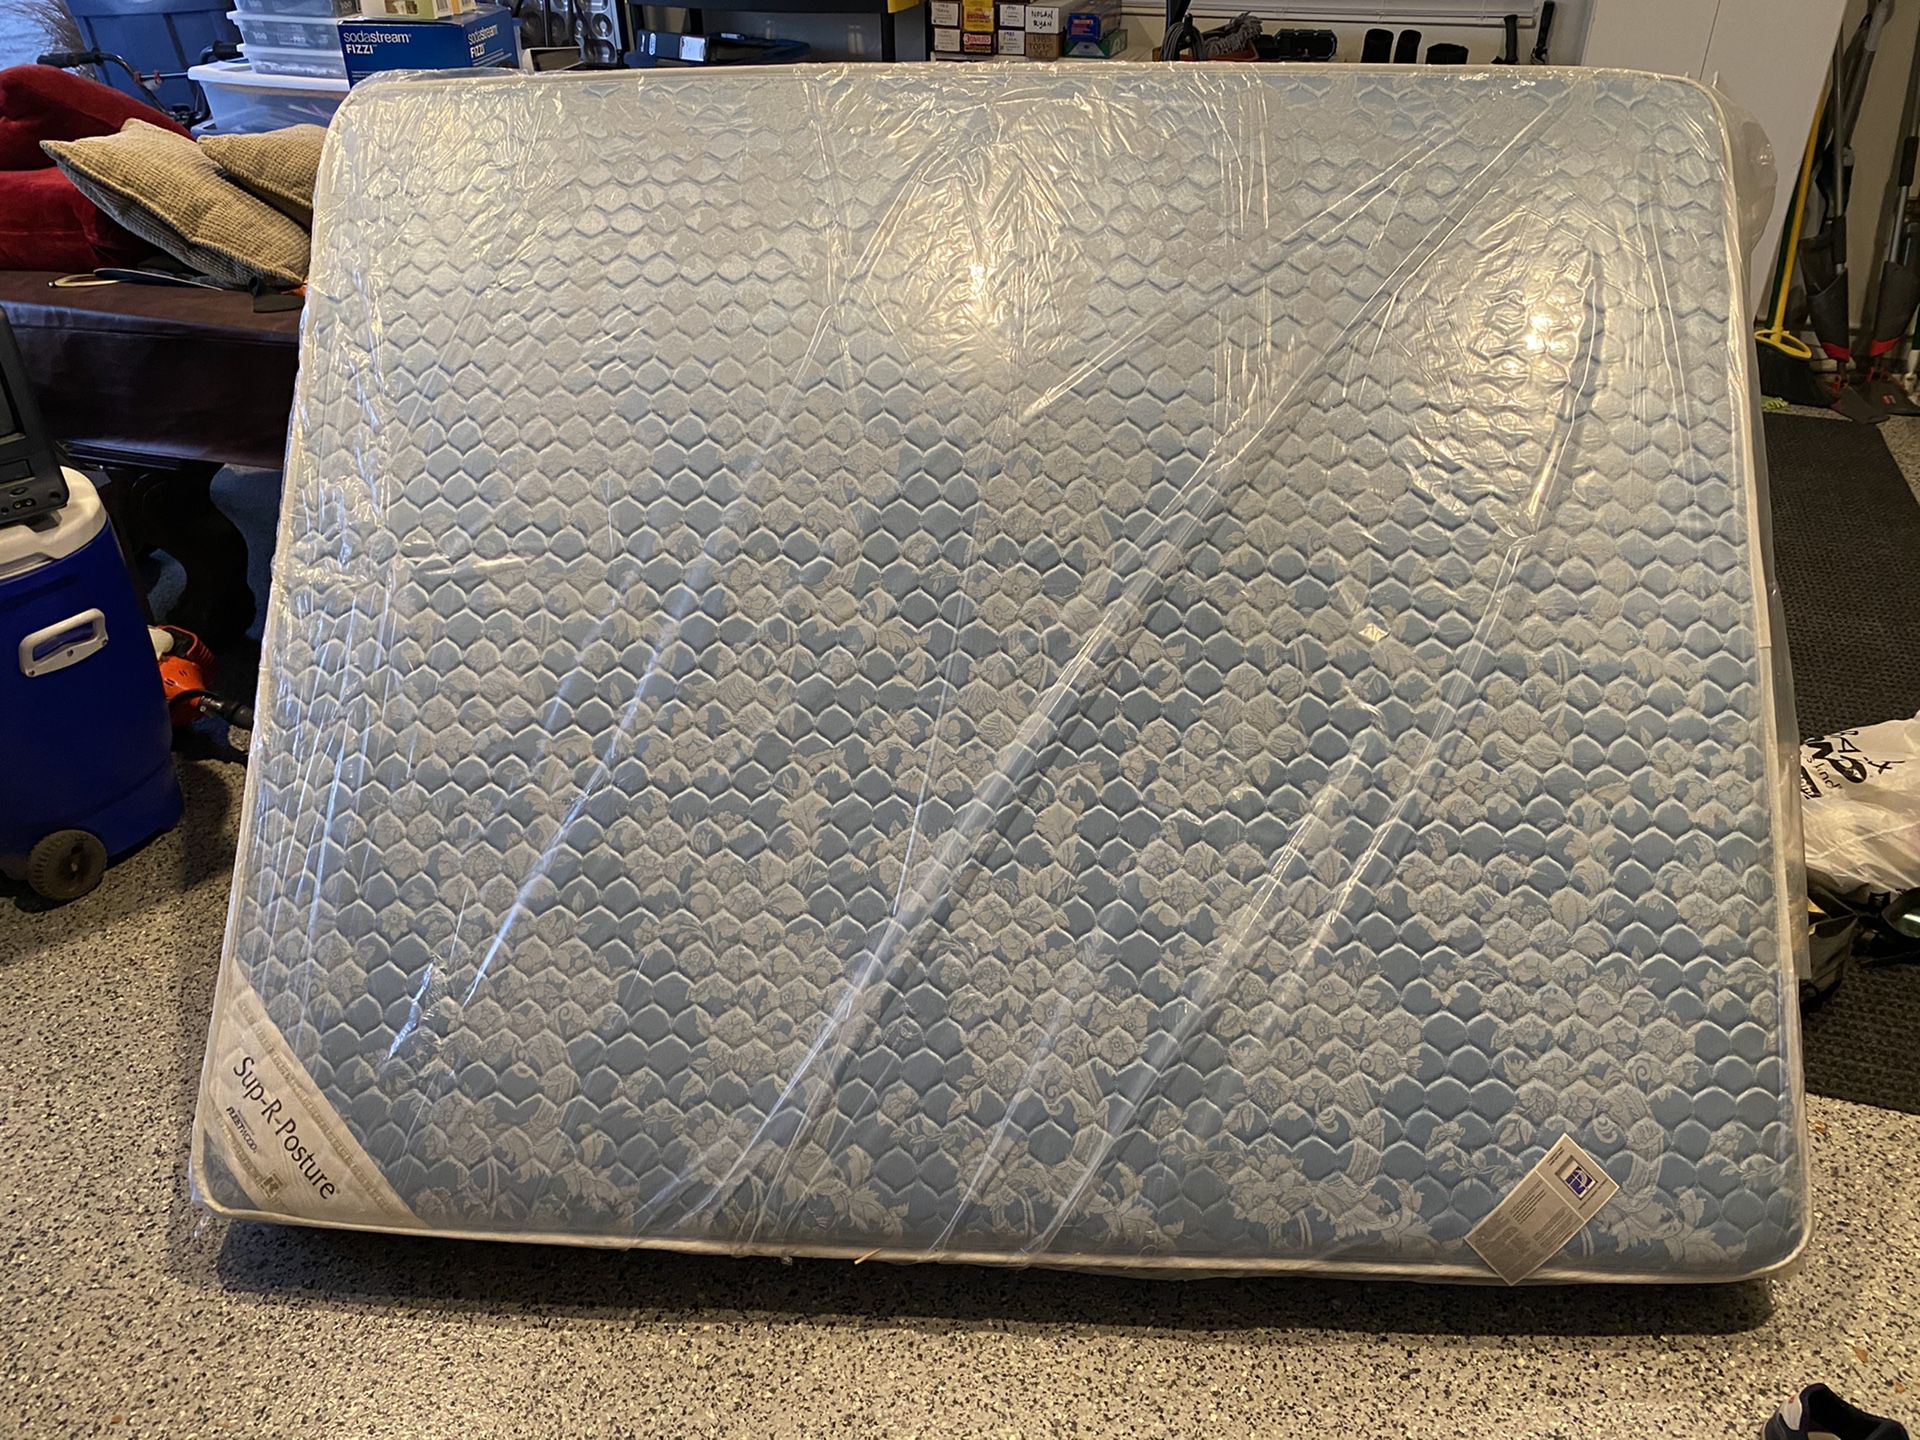 Double size mattress with original packaging plastic